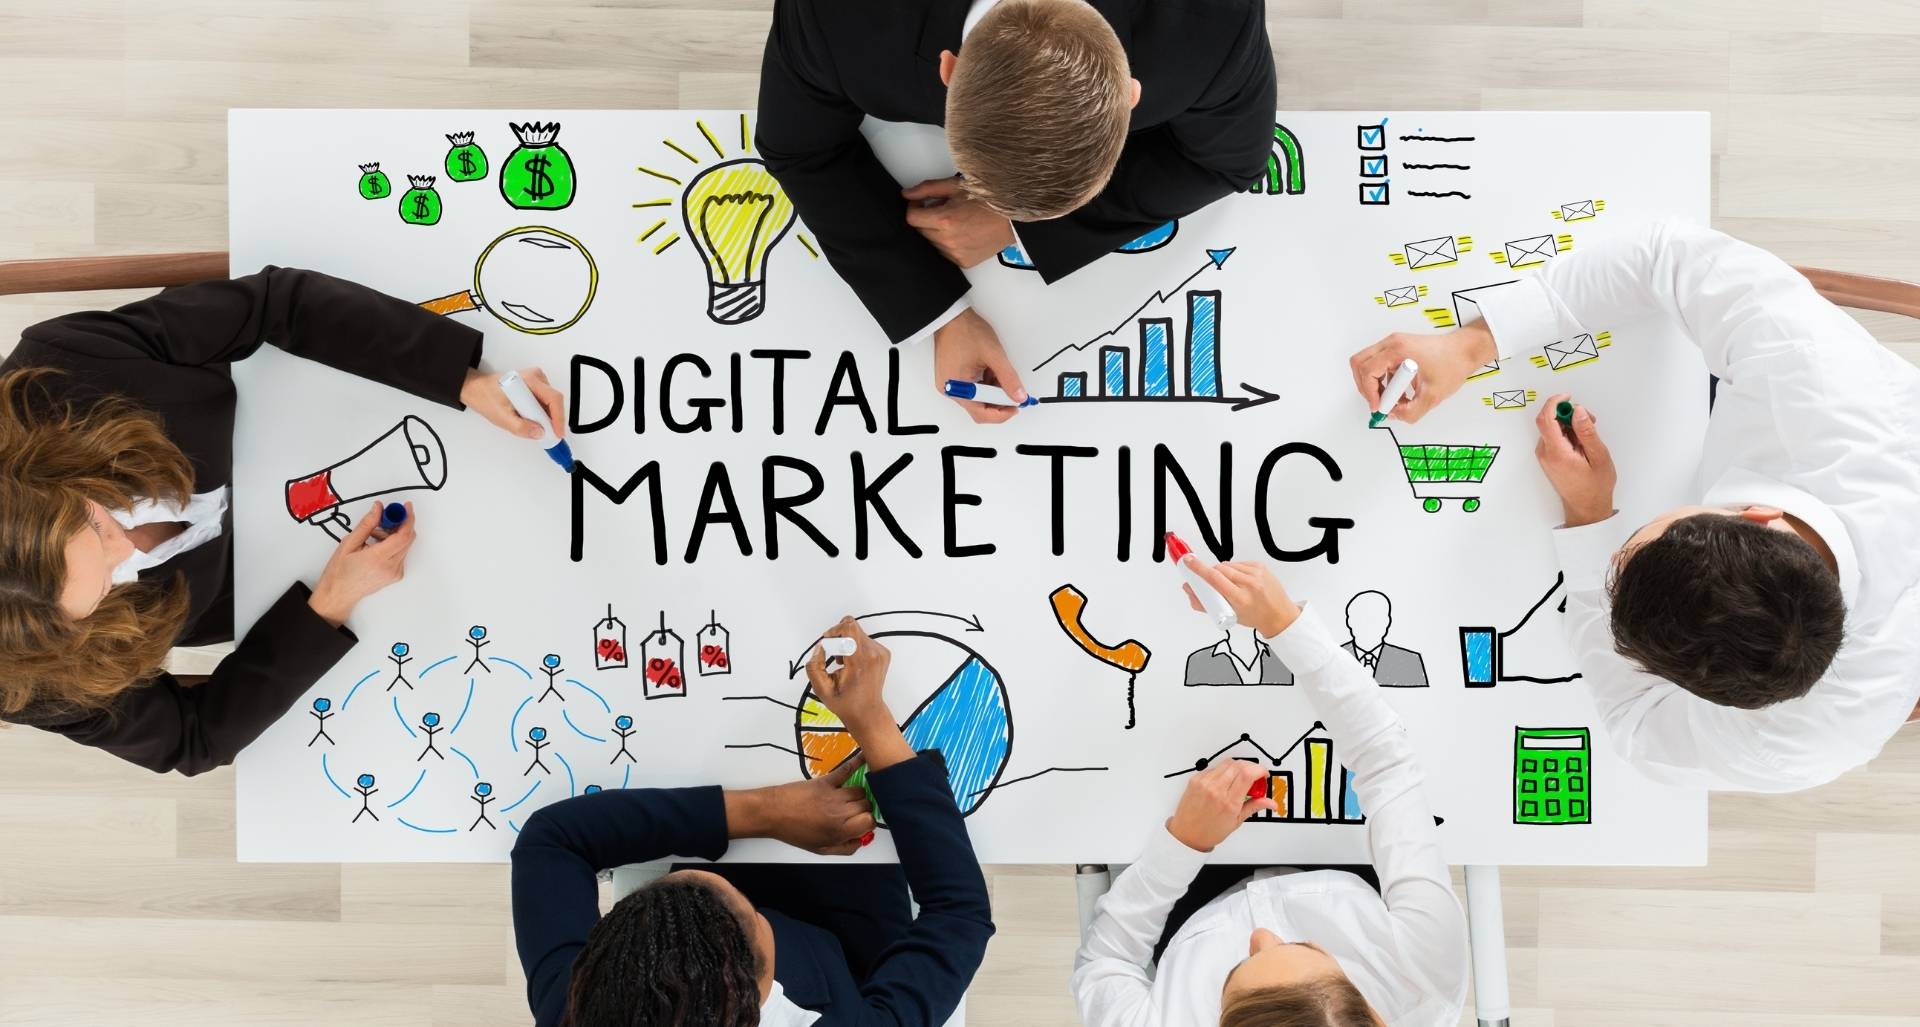 Why is Digital Marketing Important for Small Businesses